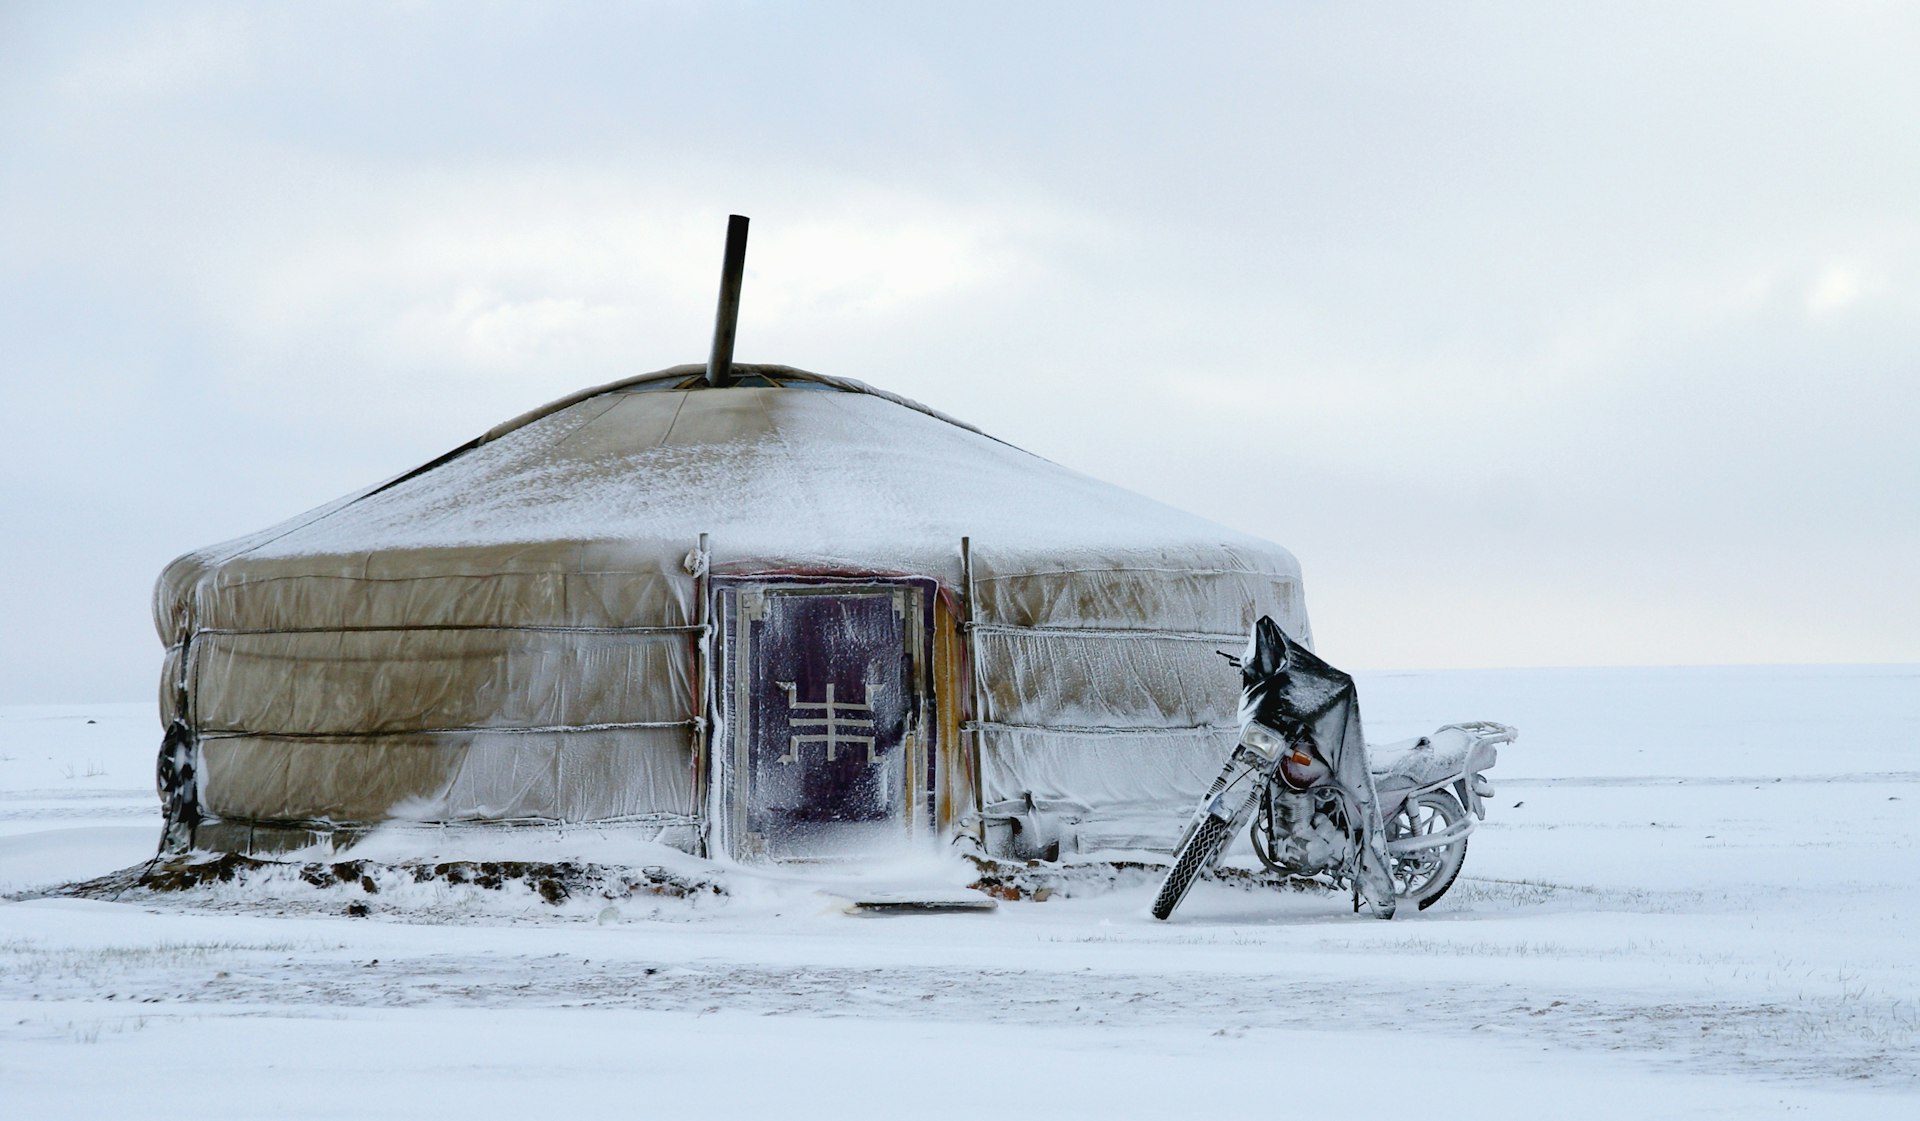 A motorcycle parked outside a round tent-link structure in a snow-covered landscape